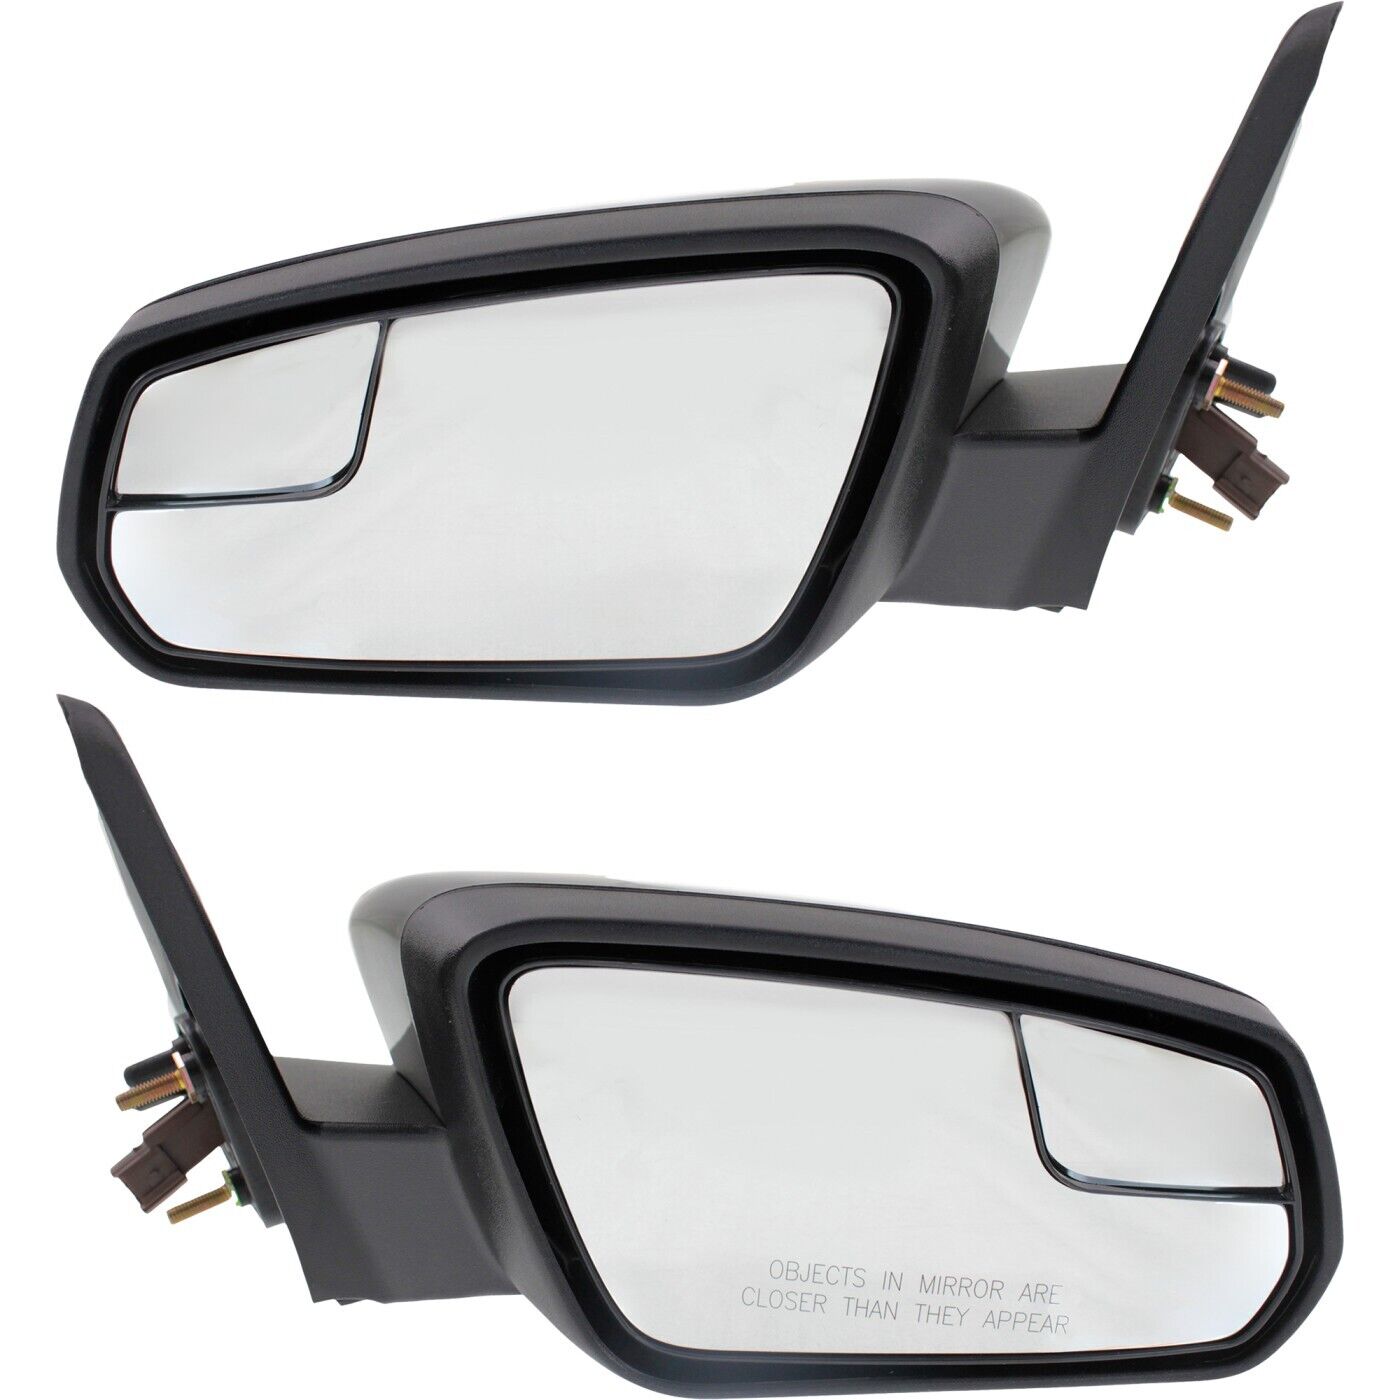 New Set of 2 Mirrors Driver & Passenger Side LH RH FO1321450, FO1320450 Pair